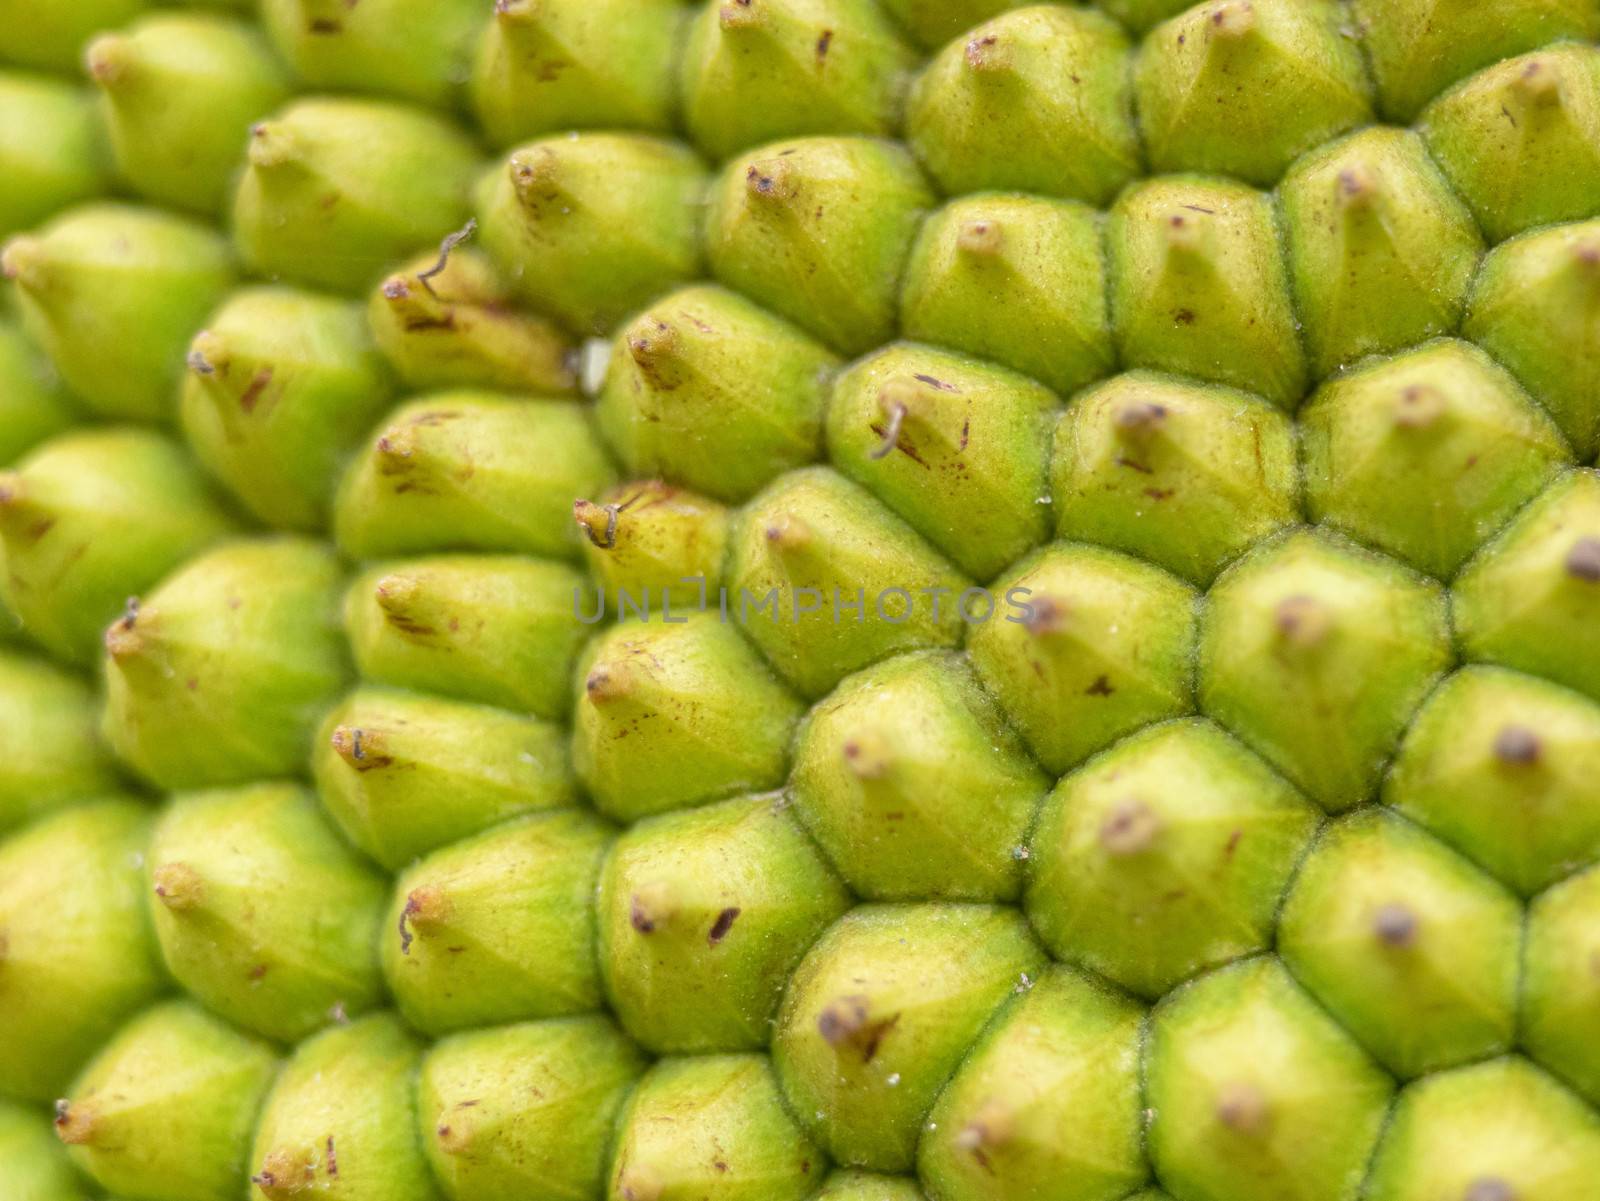 Close up of The jackfruit peel texture, Rough Green surface of tropical fruit with small eye-shaped button that is all around.